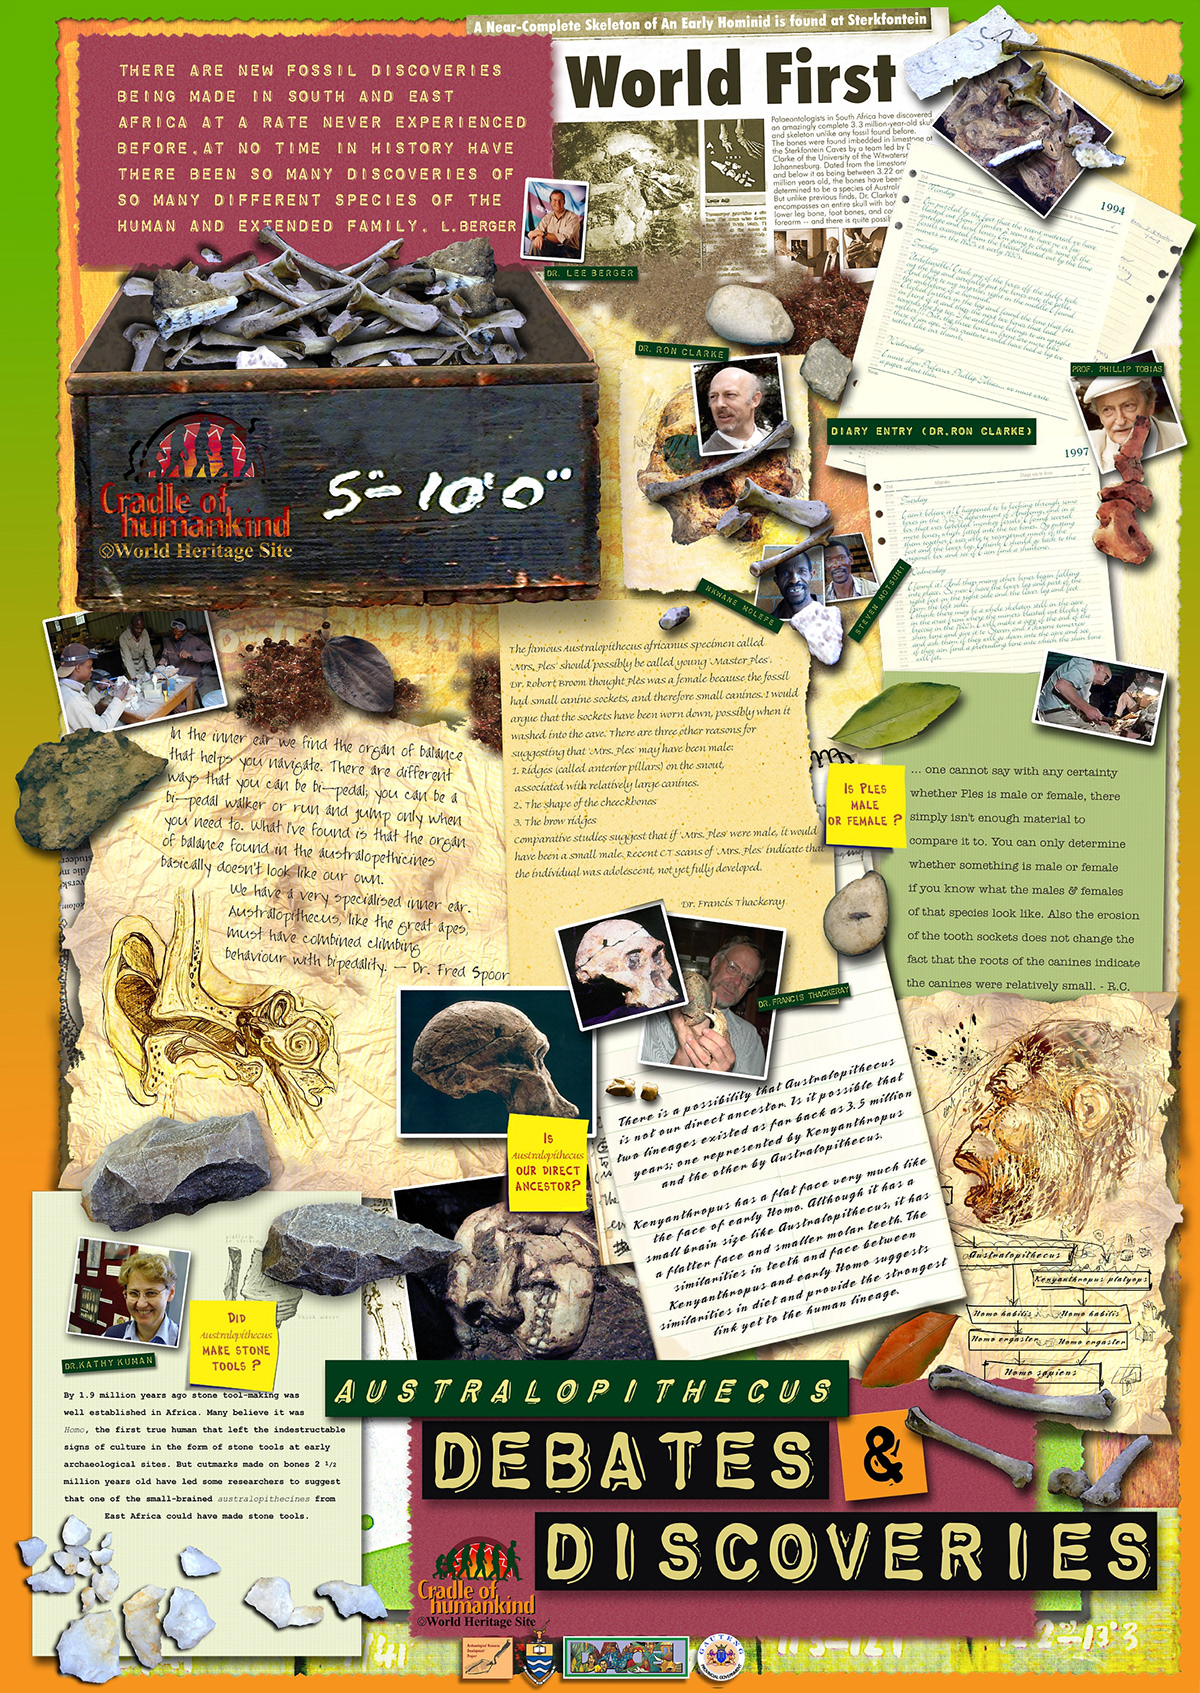 archeaology cradle of humankind educational posters World Heritage Site tools evolution environment south africa fossils animals map